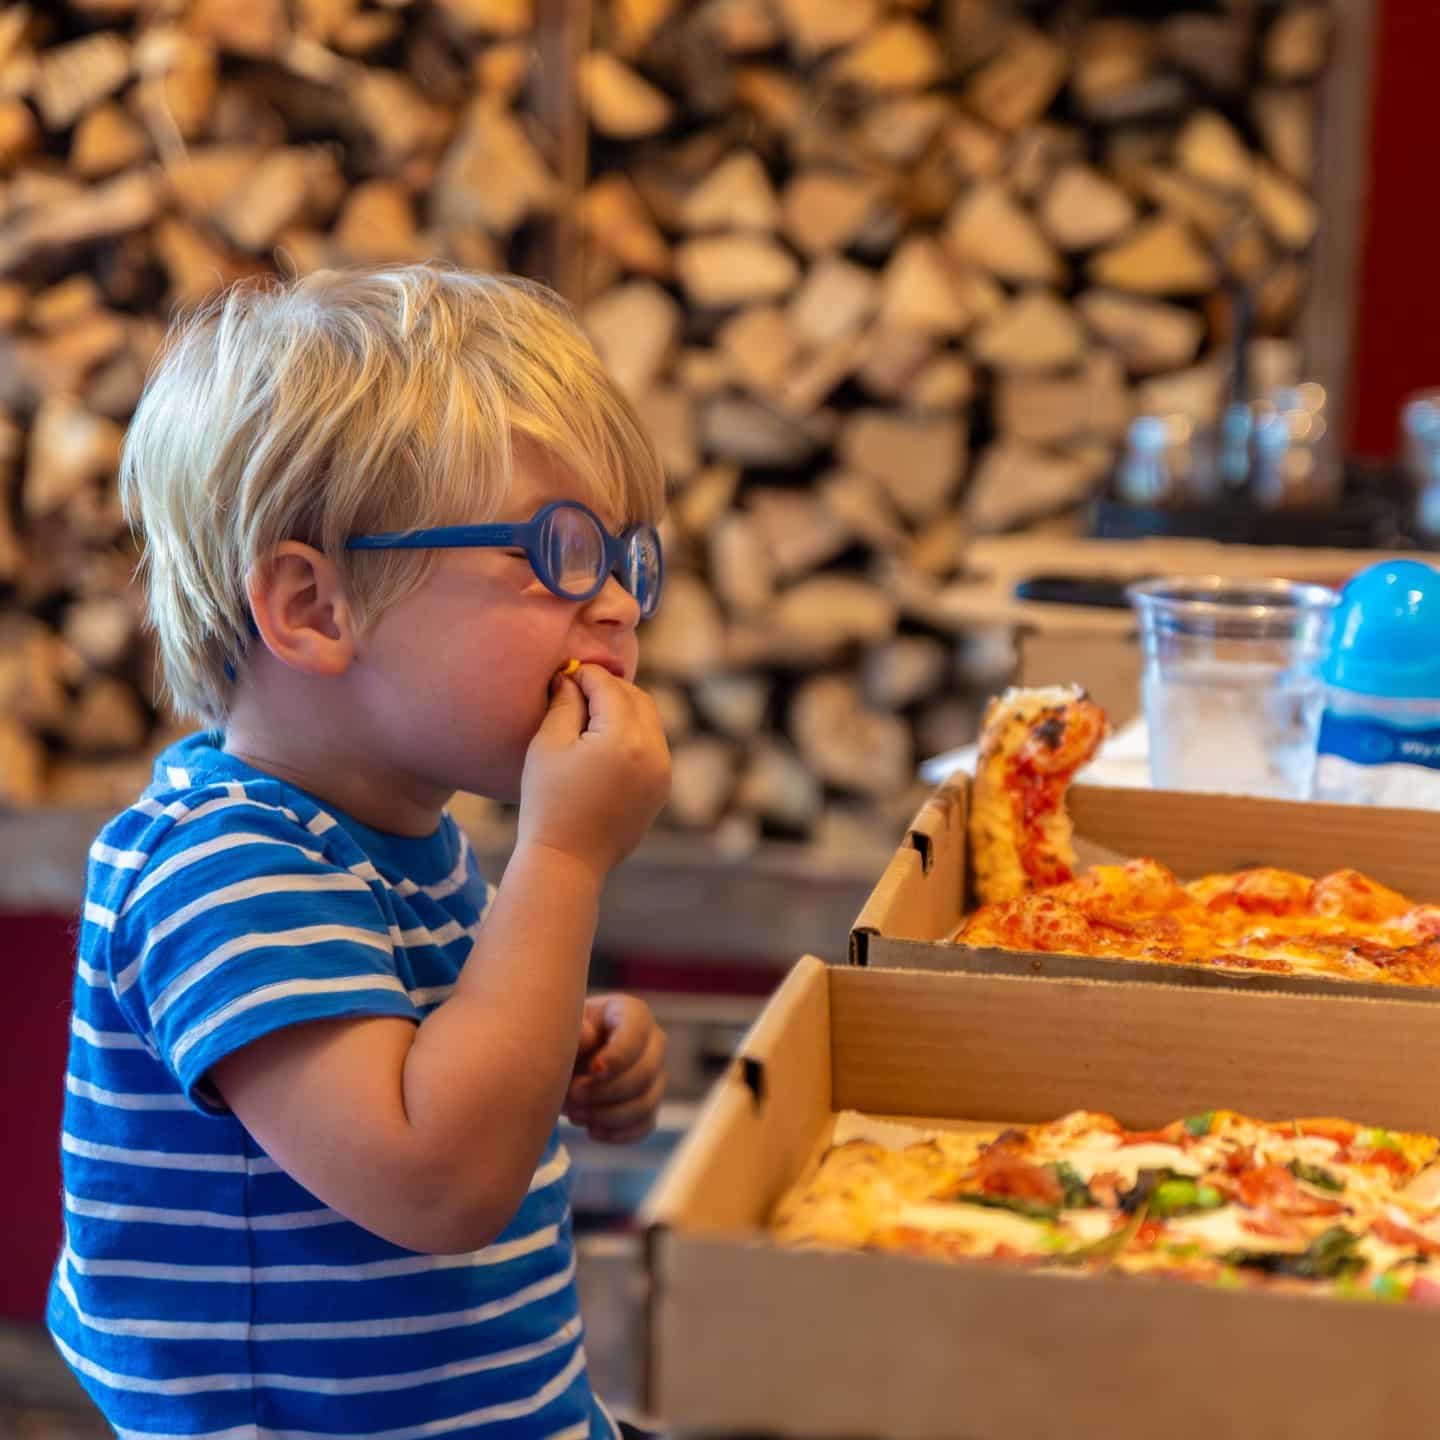 Every Tuesday kids eat free in Knoxville at Hard Knox Pizza